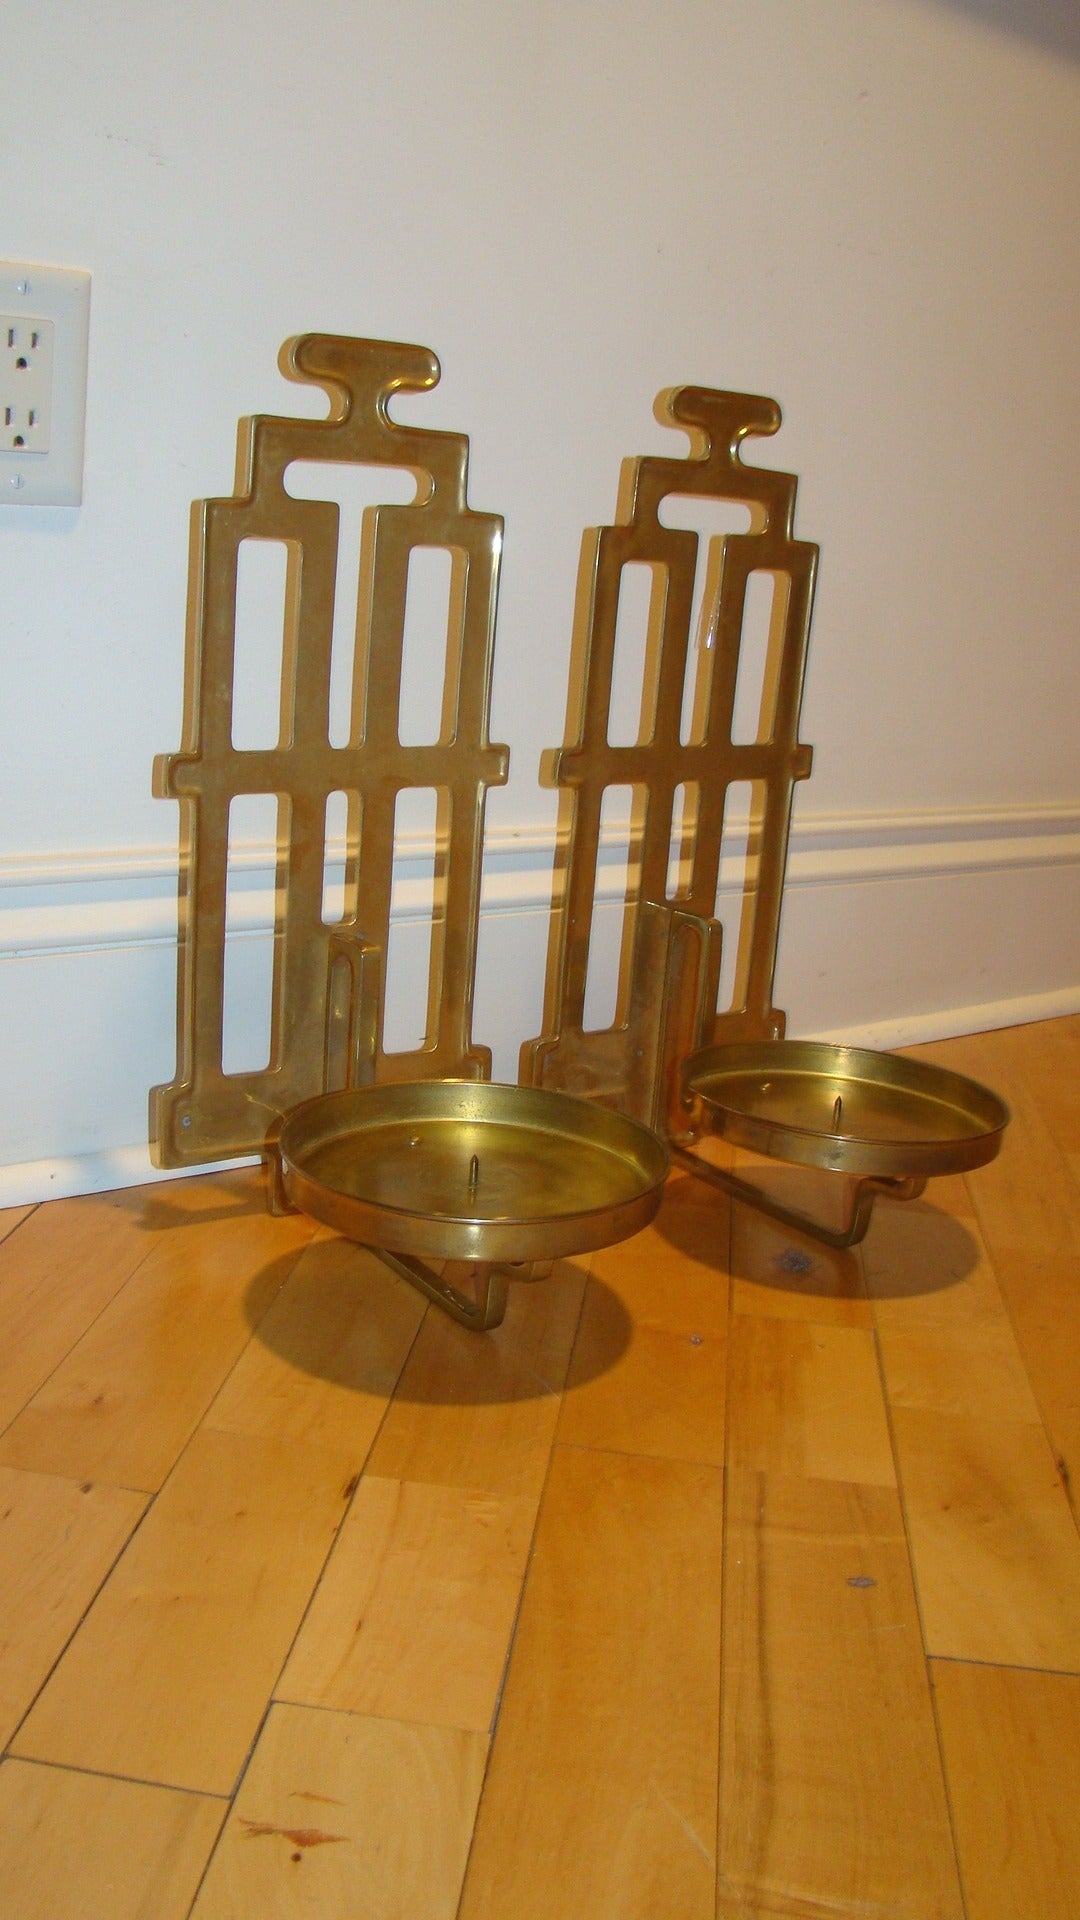 Beautiful pair of sculptural brass Mid-Century candleholders by Sarreid. This interesting pair are comprised of solid brass and can be hung on the wall or used on a table. Signed with Sarreid labels.